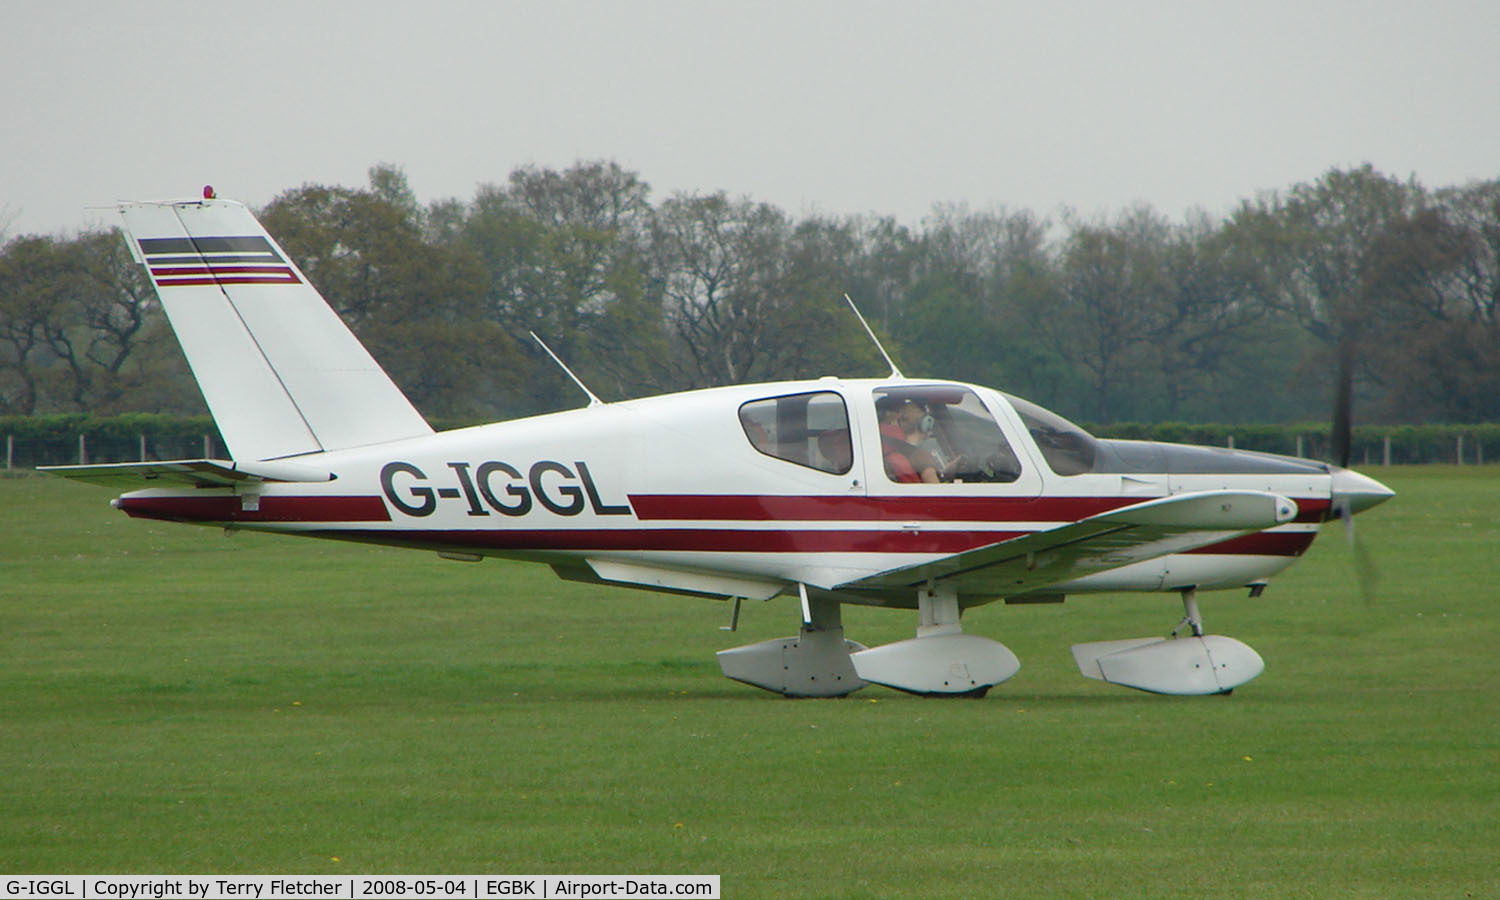 G-IGGL, 1980 Socata TB-10 Tobago C/N 146, Visitor to the Sywell GA scene on Tiger Moth Fly-in Day in May 2008